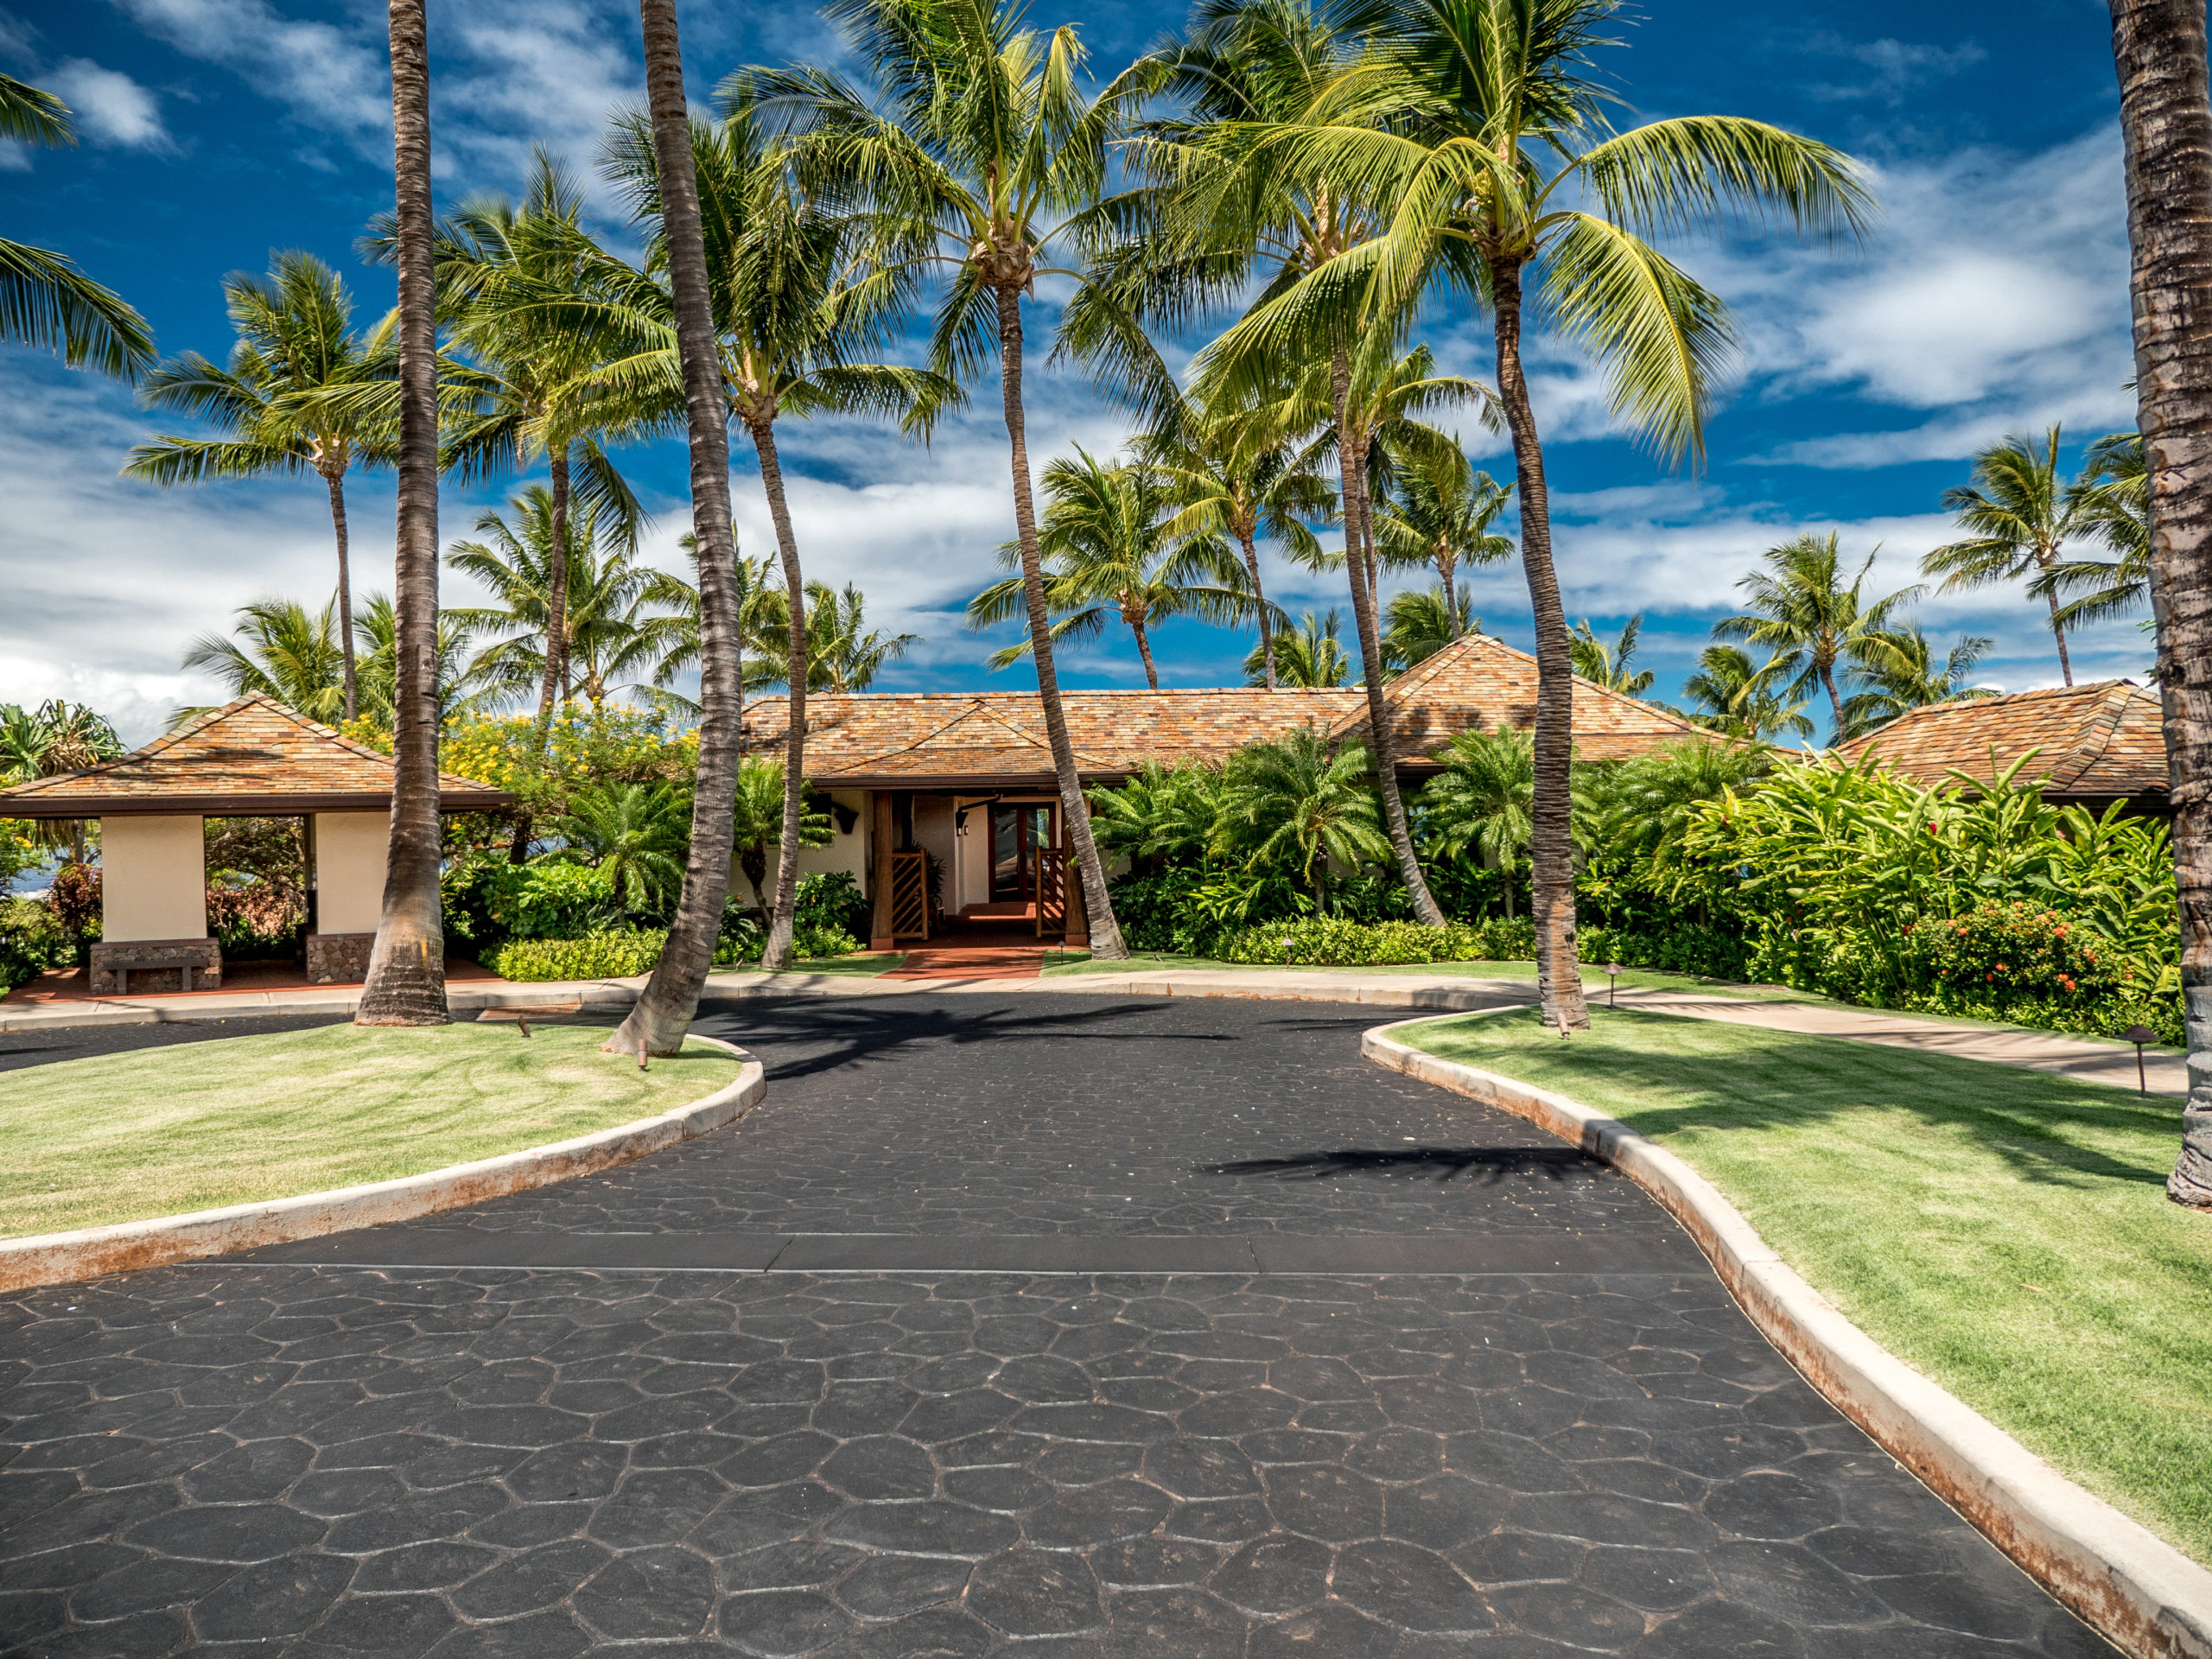 Purchasing Hawaii Checklist Real Estate Guide